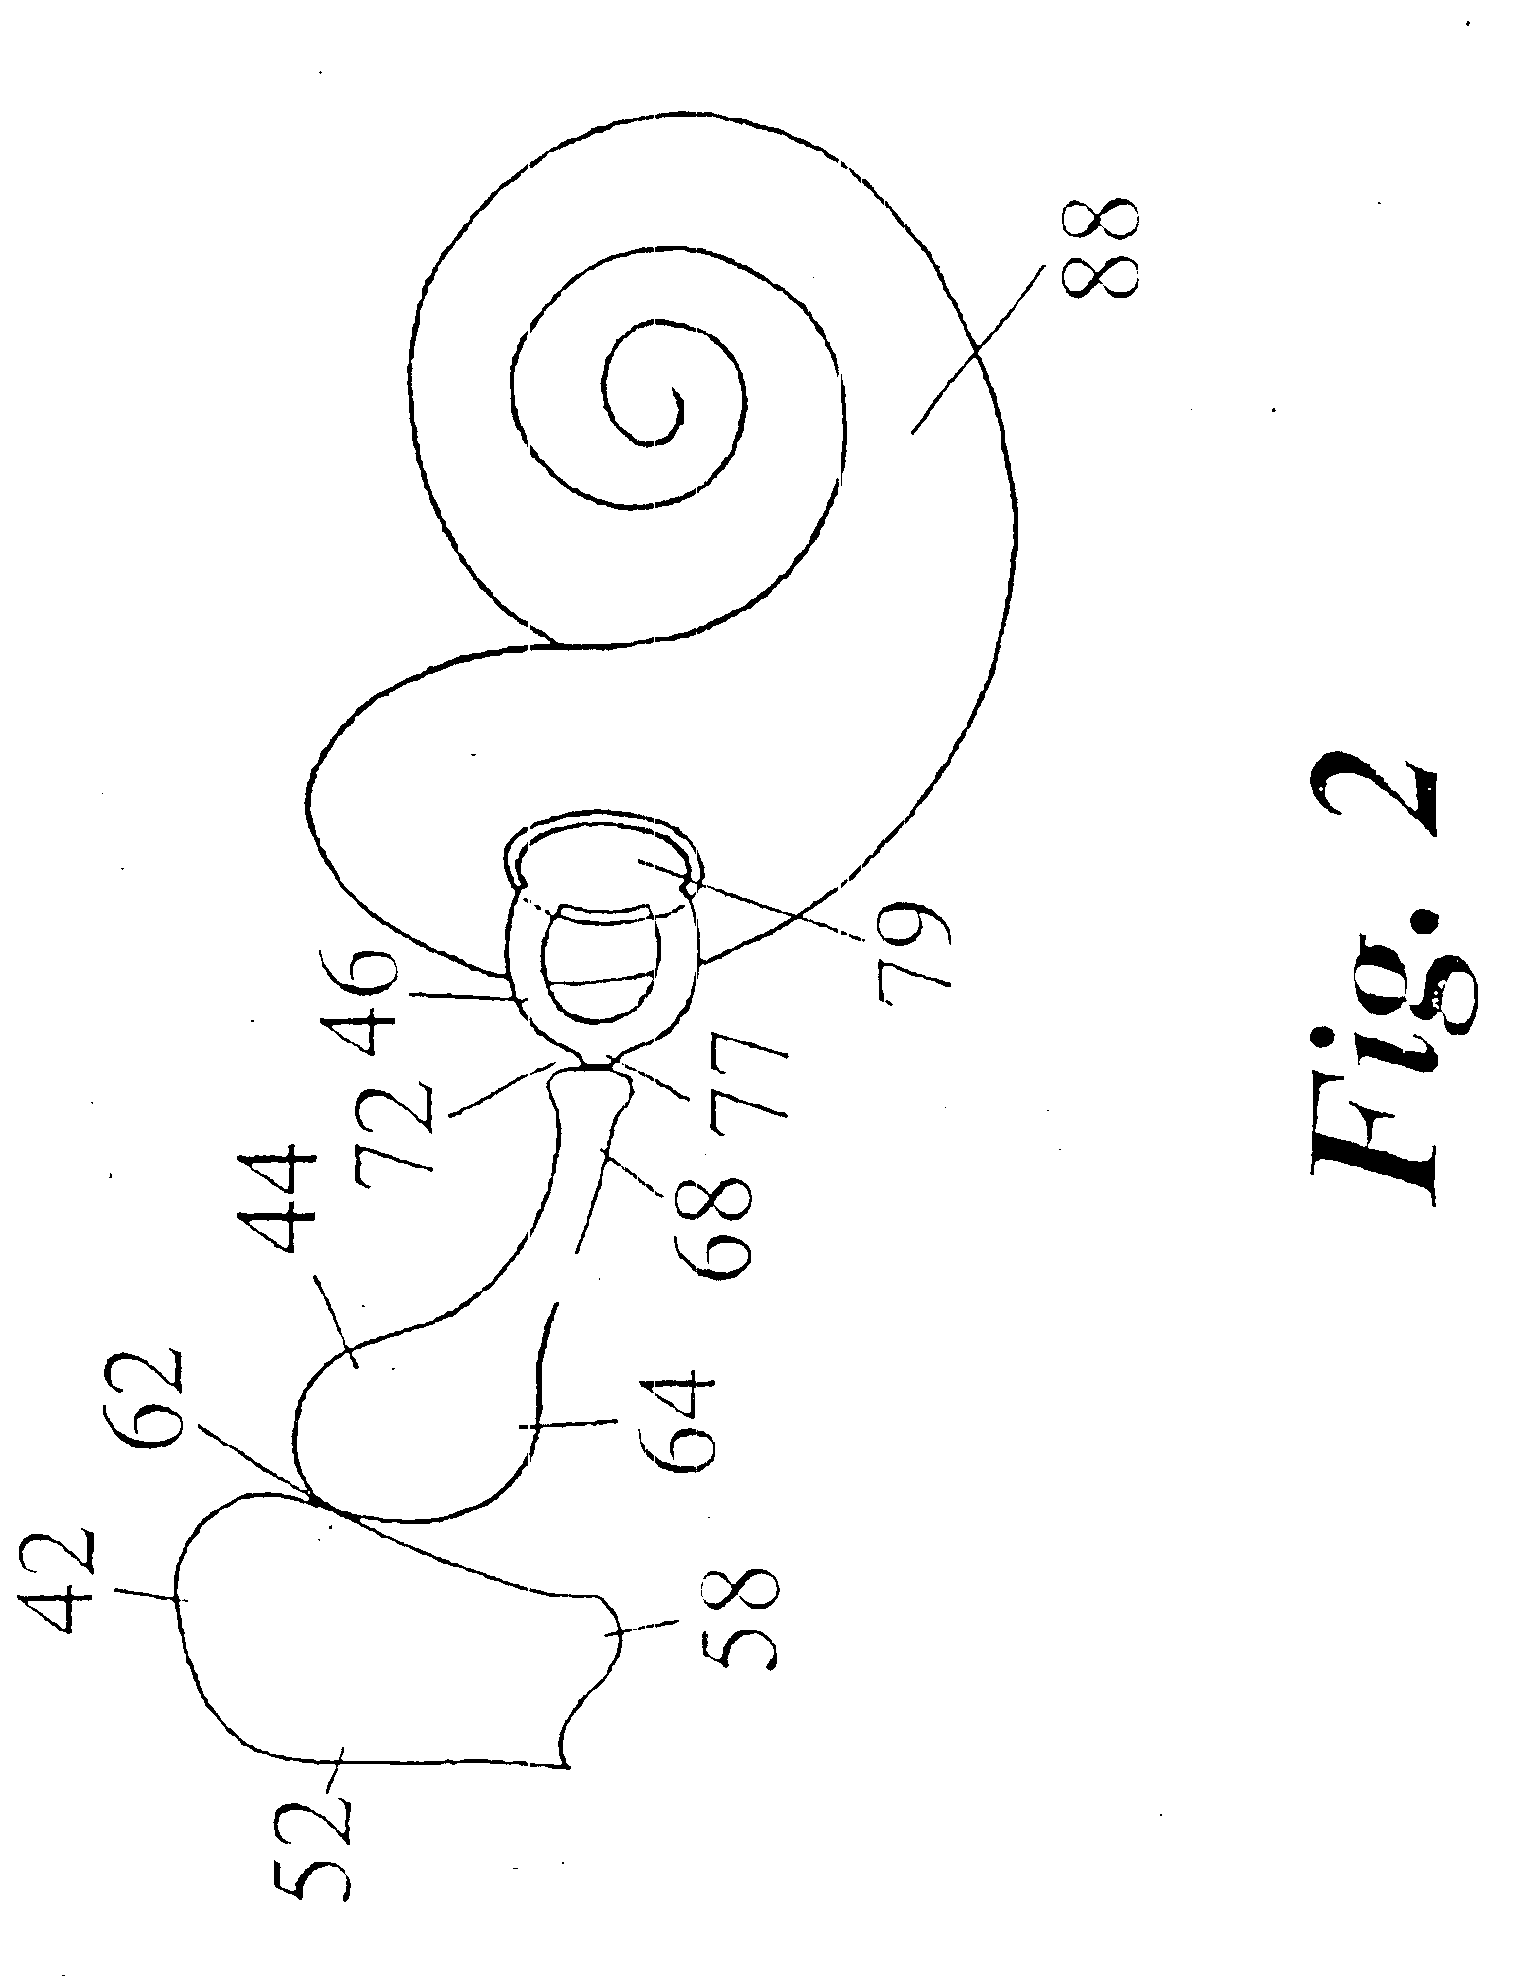 Method for creating a coupling between a device and an ear structure in an implantable hearing assistance device